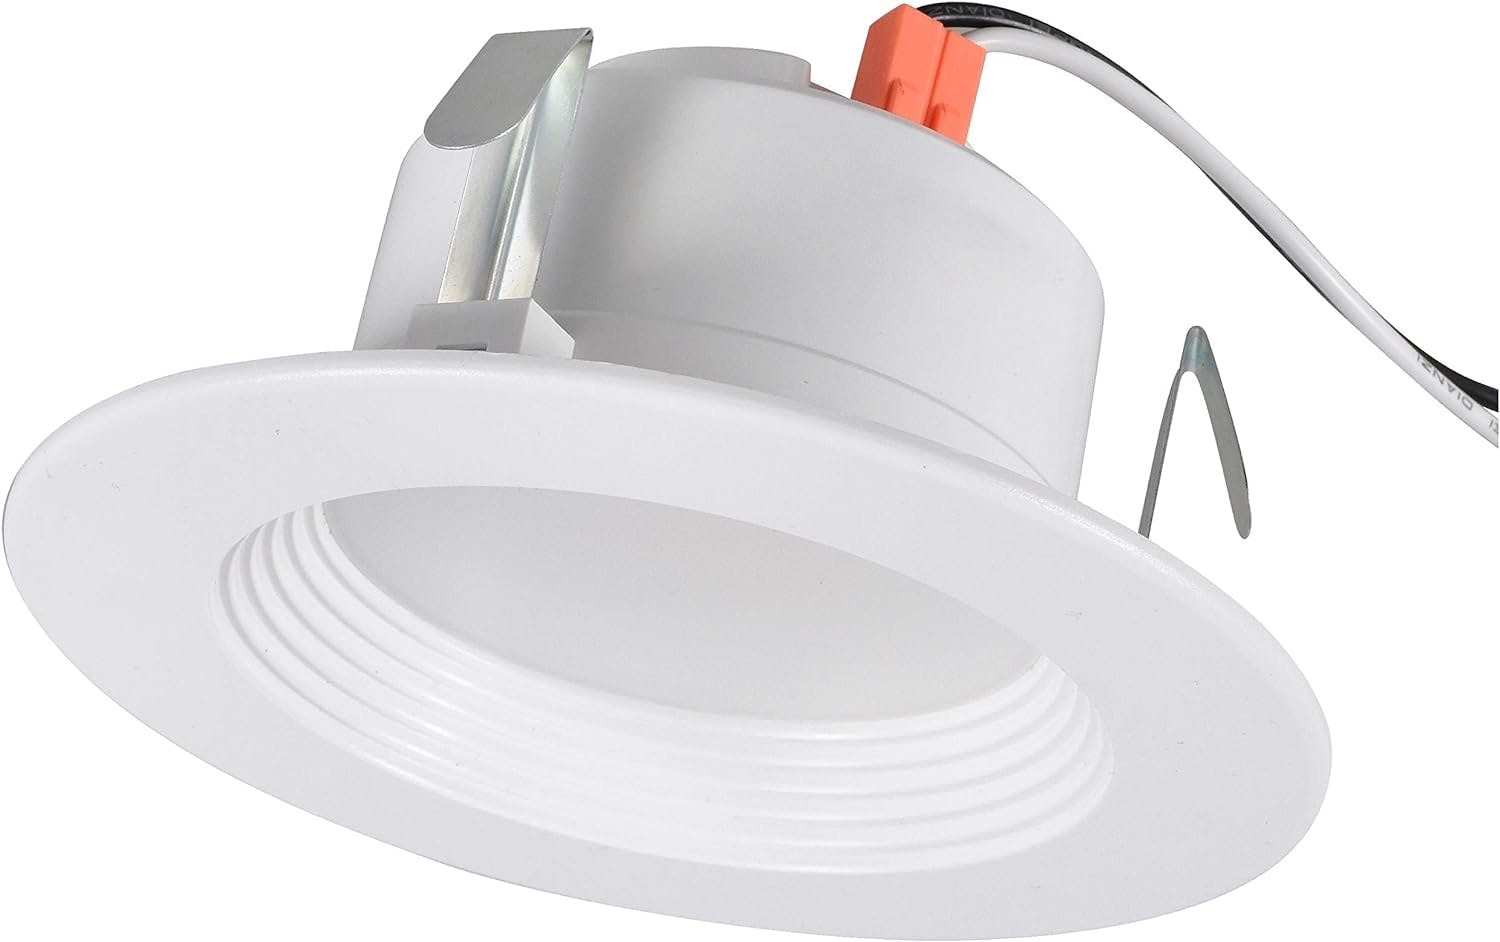 Dimmable Soft White LED Downlight Kit, 7.5W E26, Indoor/Outdoor